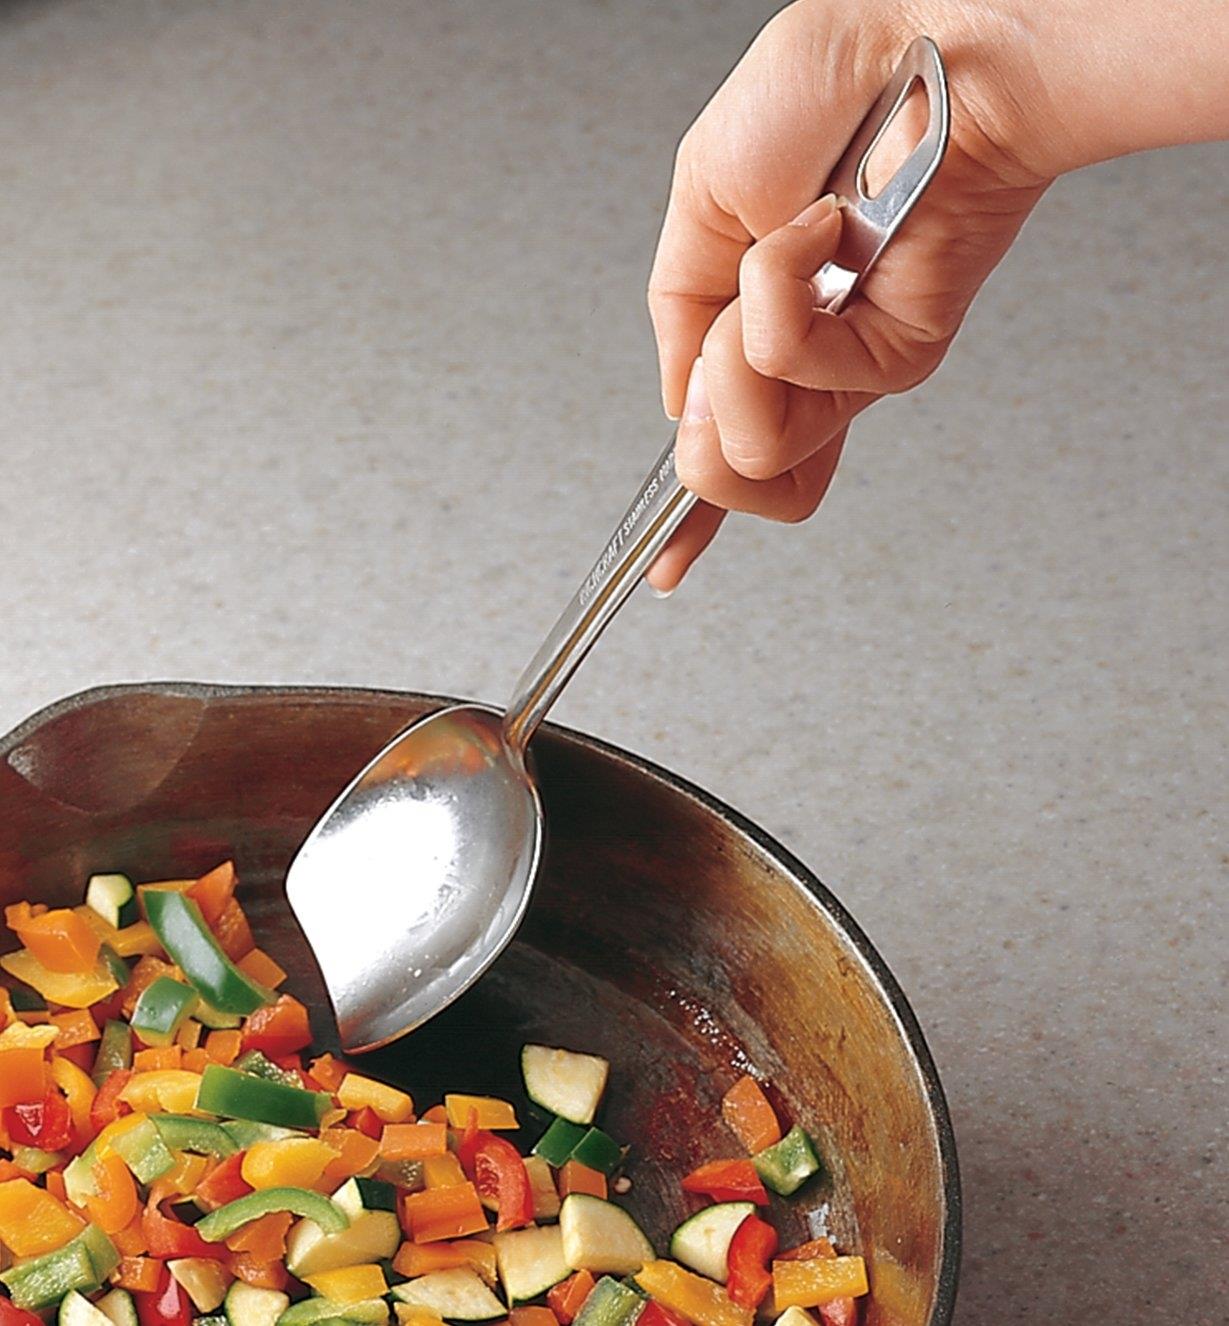 Using the solid slanted spoon to stir diced vegetables in a frying pan